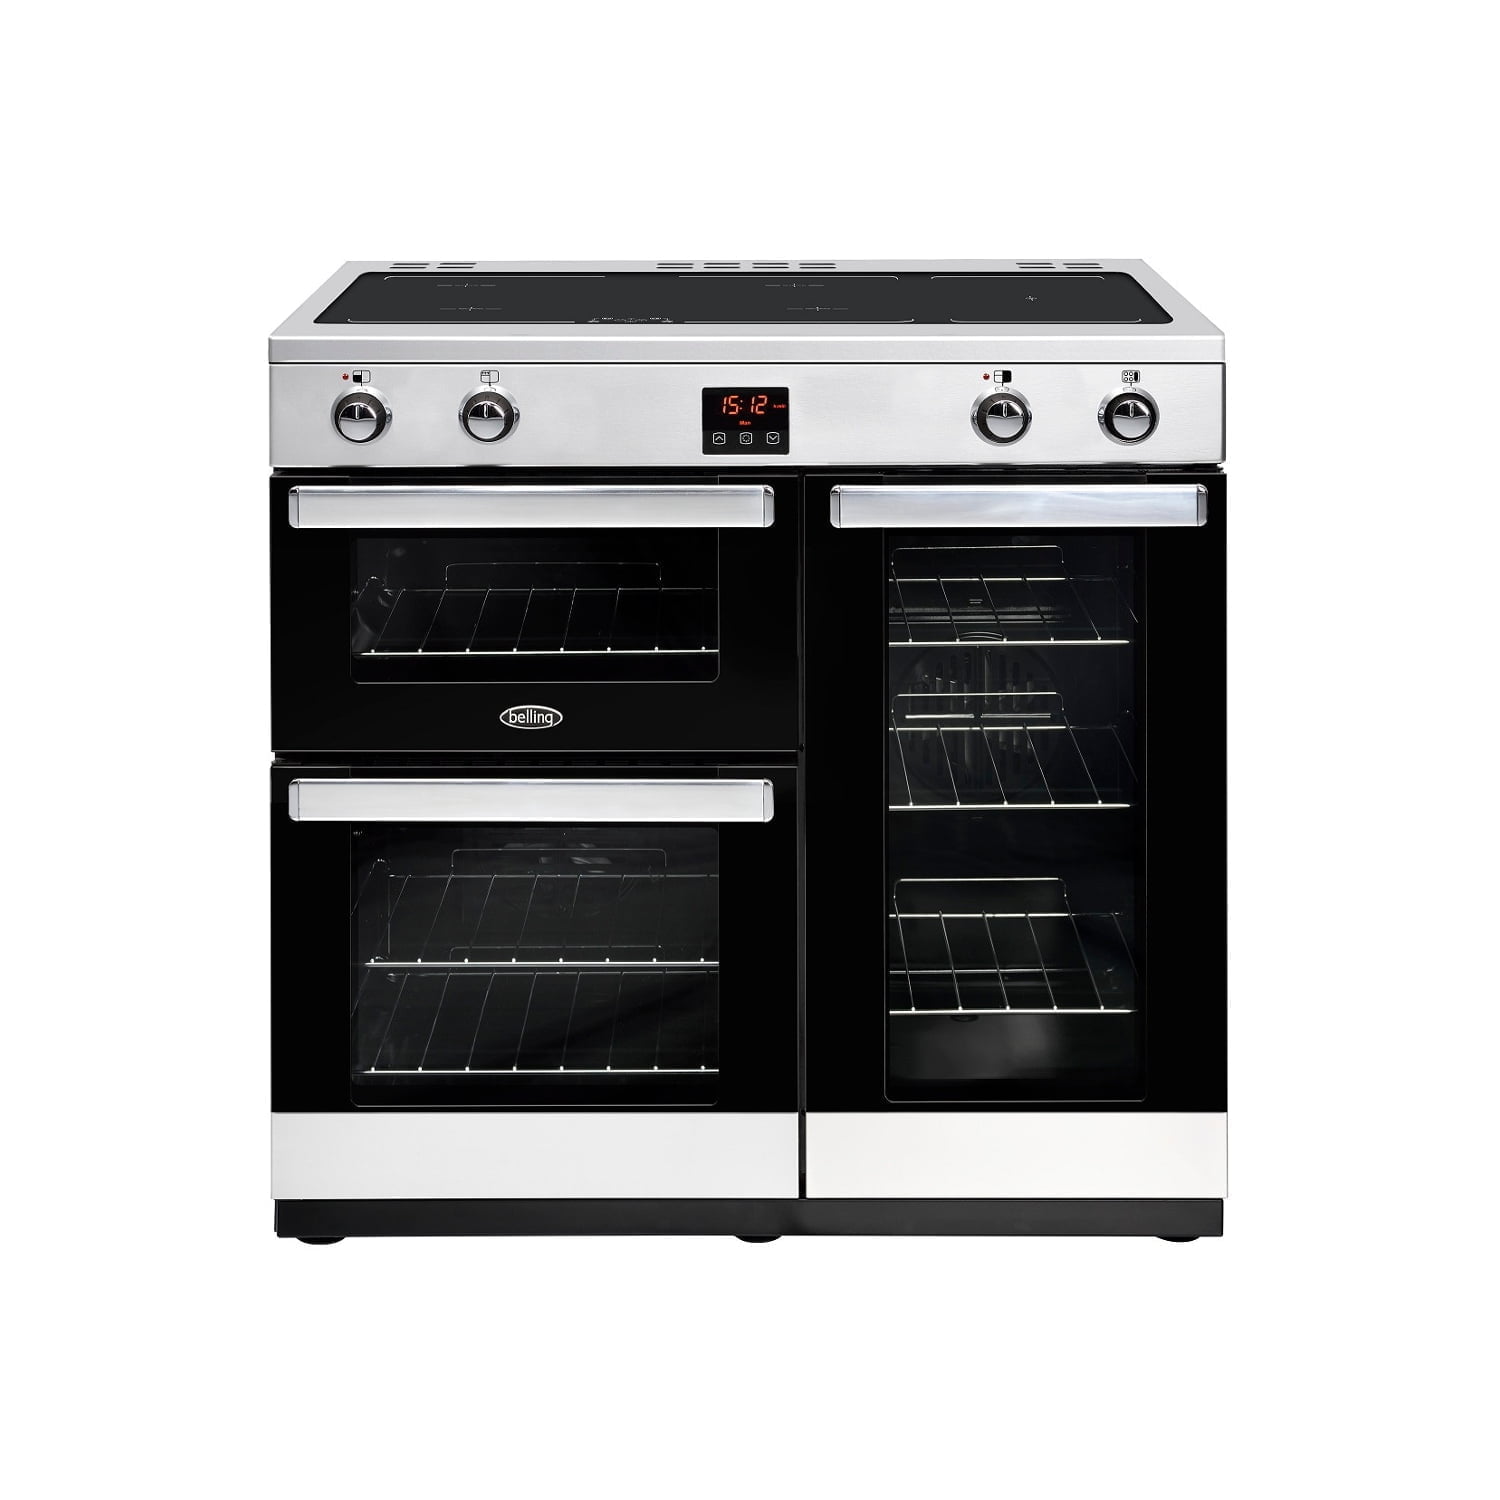 Belling Cookcentre 90Ei Stainless Steel 90cm Electric Induction Range Cooker